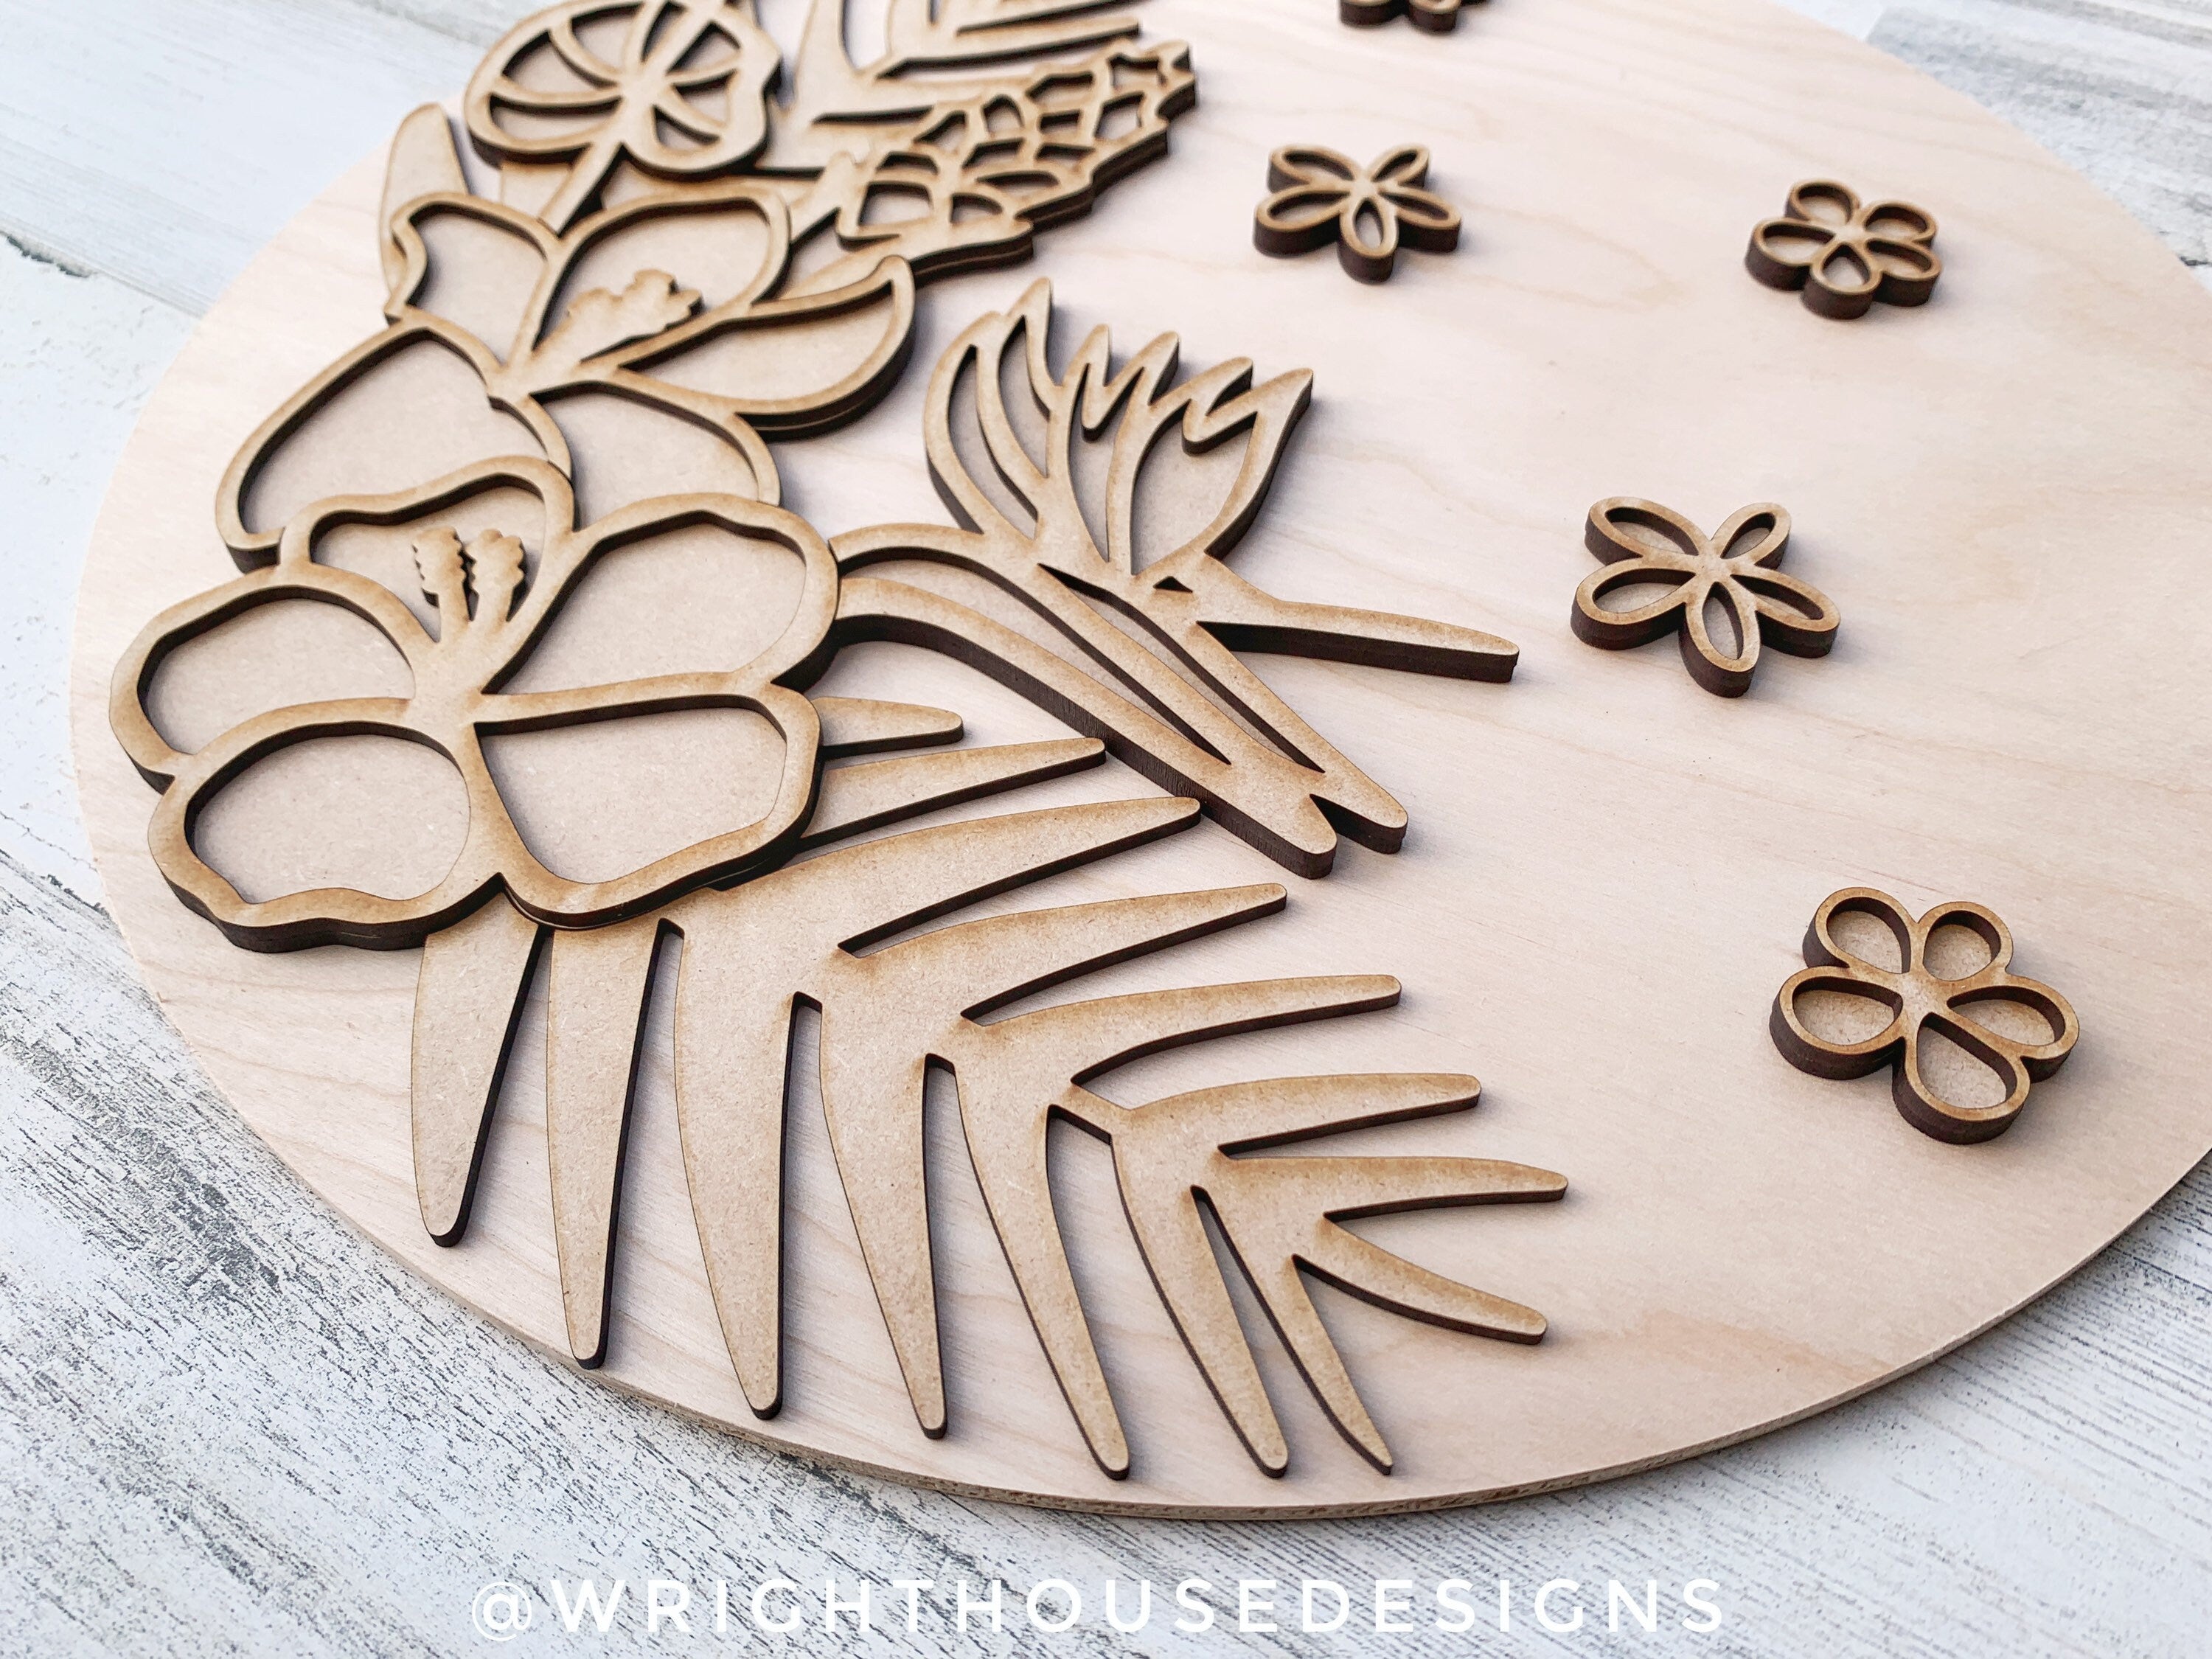 DIGITAL FILE - Hibiscus, Lily, Birds of Paradise - Intermediate Tropical Floral Round - Files for Sign Making - SVG Cut File For Glowforge